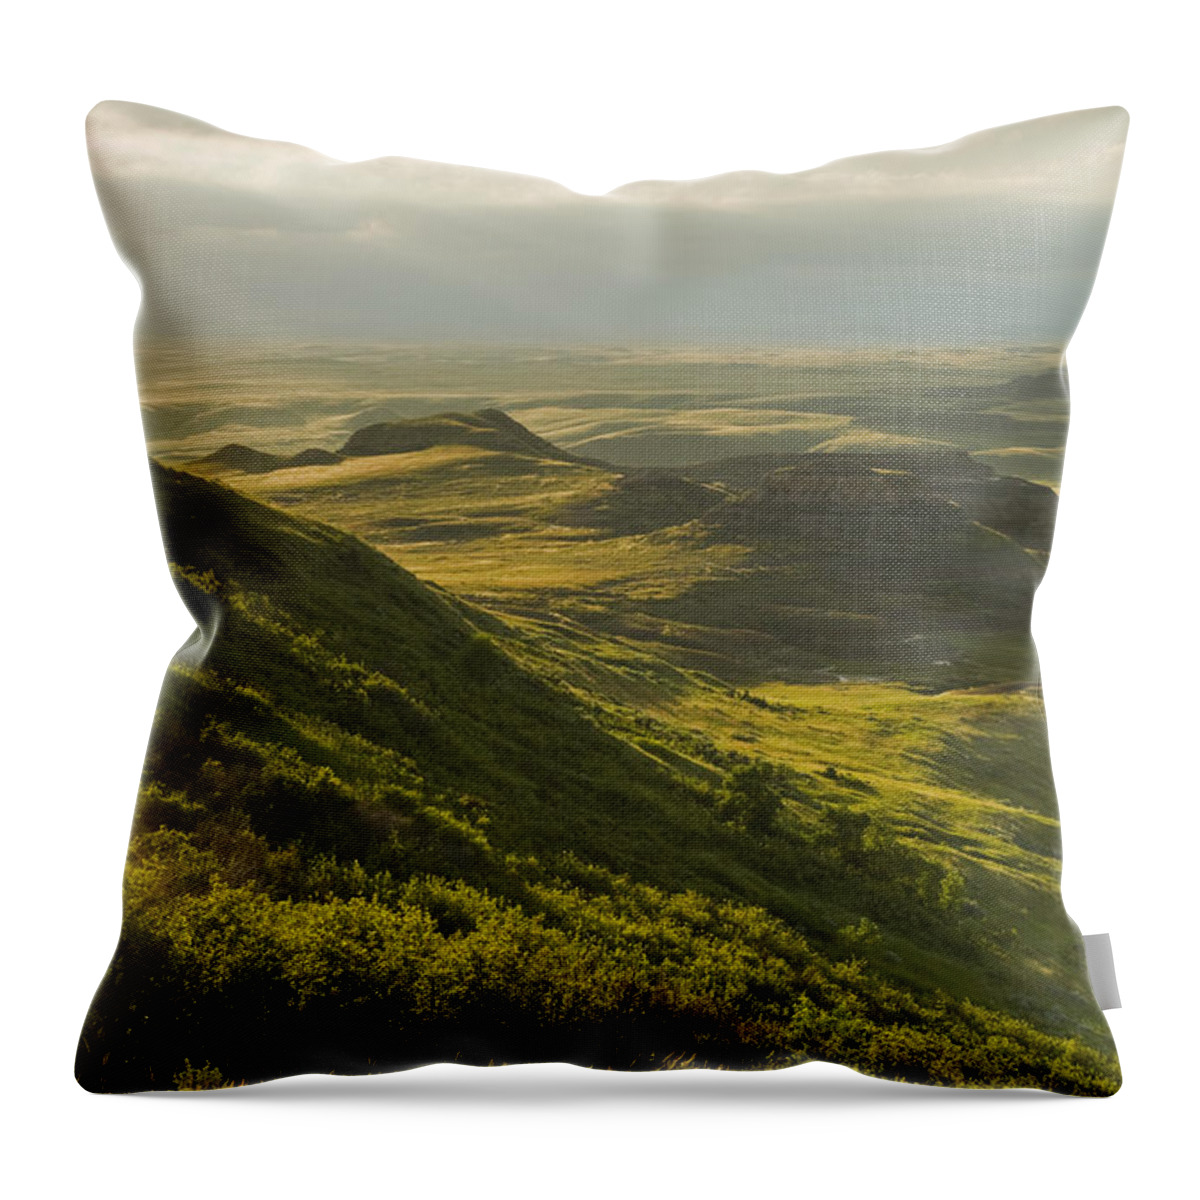 Horizon Throw Pillow featuring the photograph Killdeer Badlands In The East Block Of by Dave Reede